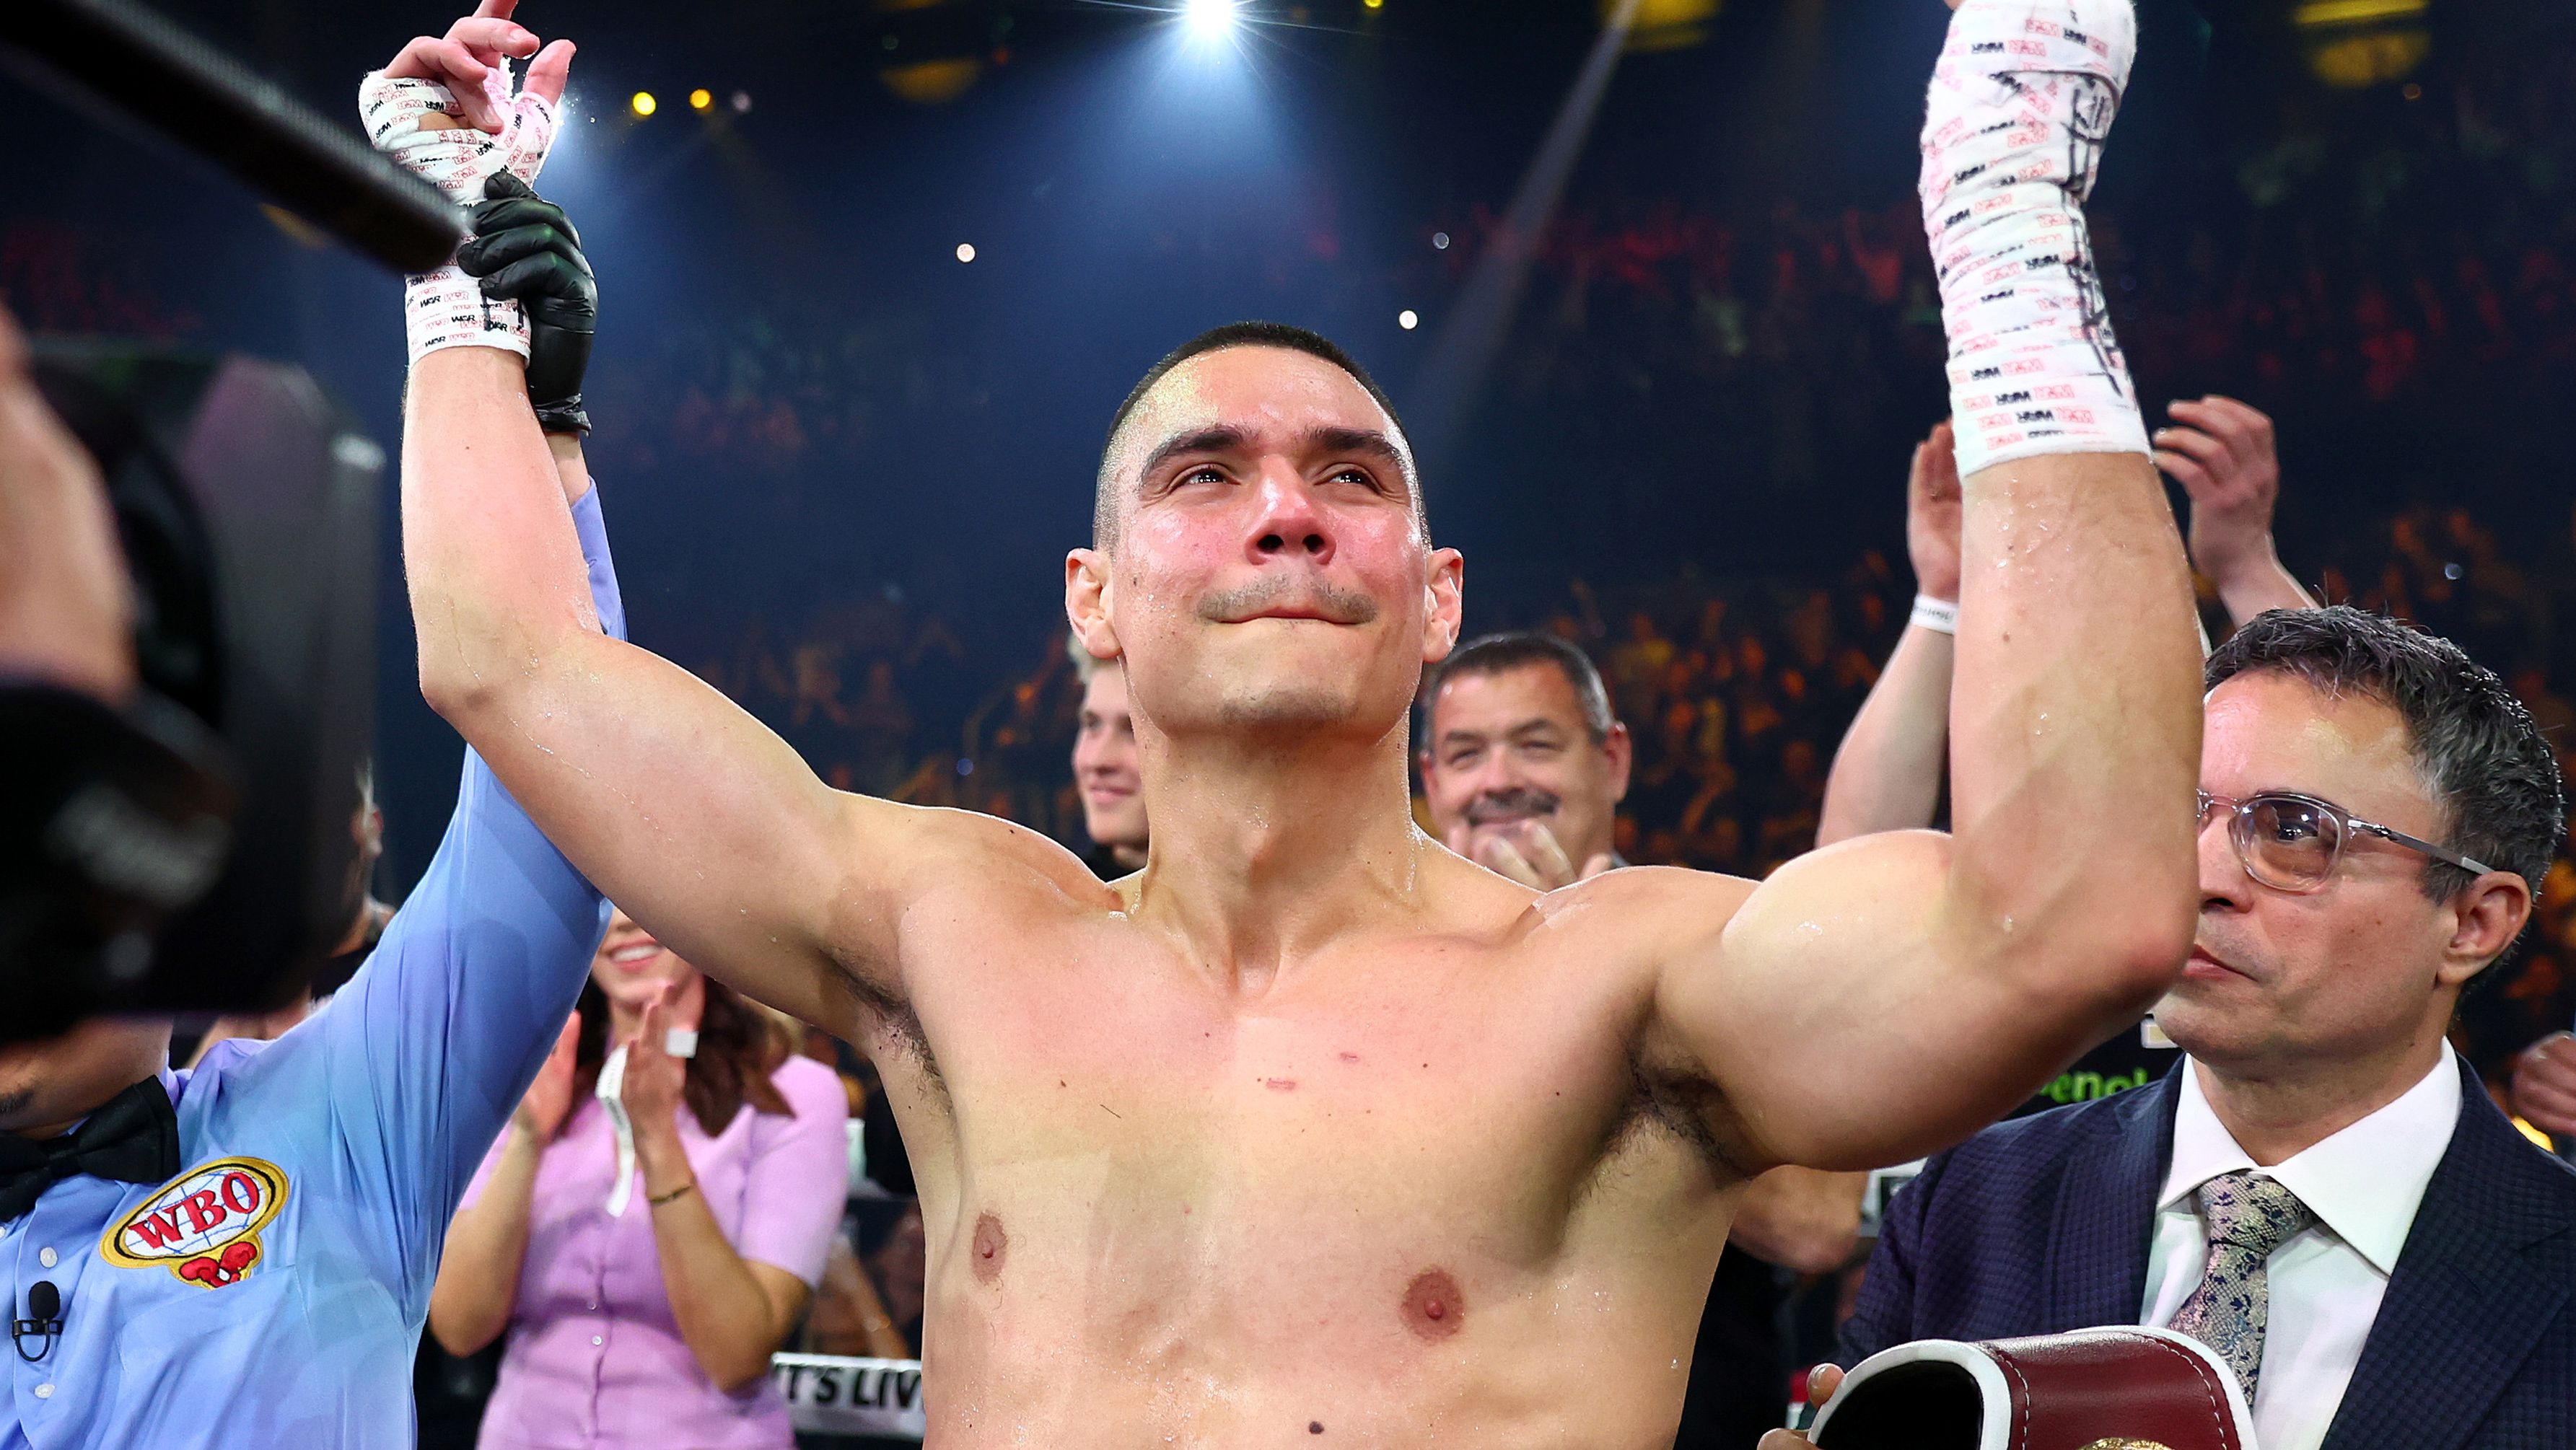 Tim Tszyu is now officially a world champion after Jermell Charlo stepped in the ring against Canelo Alvarez